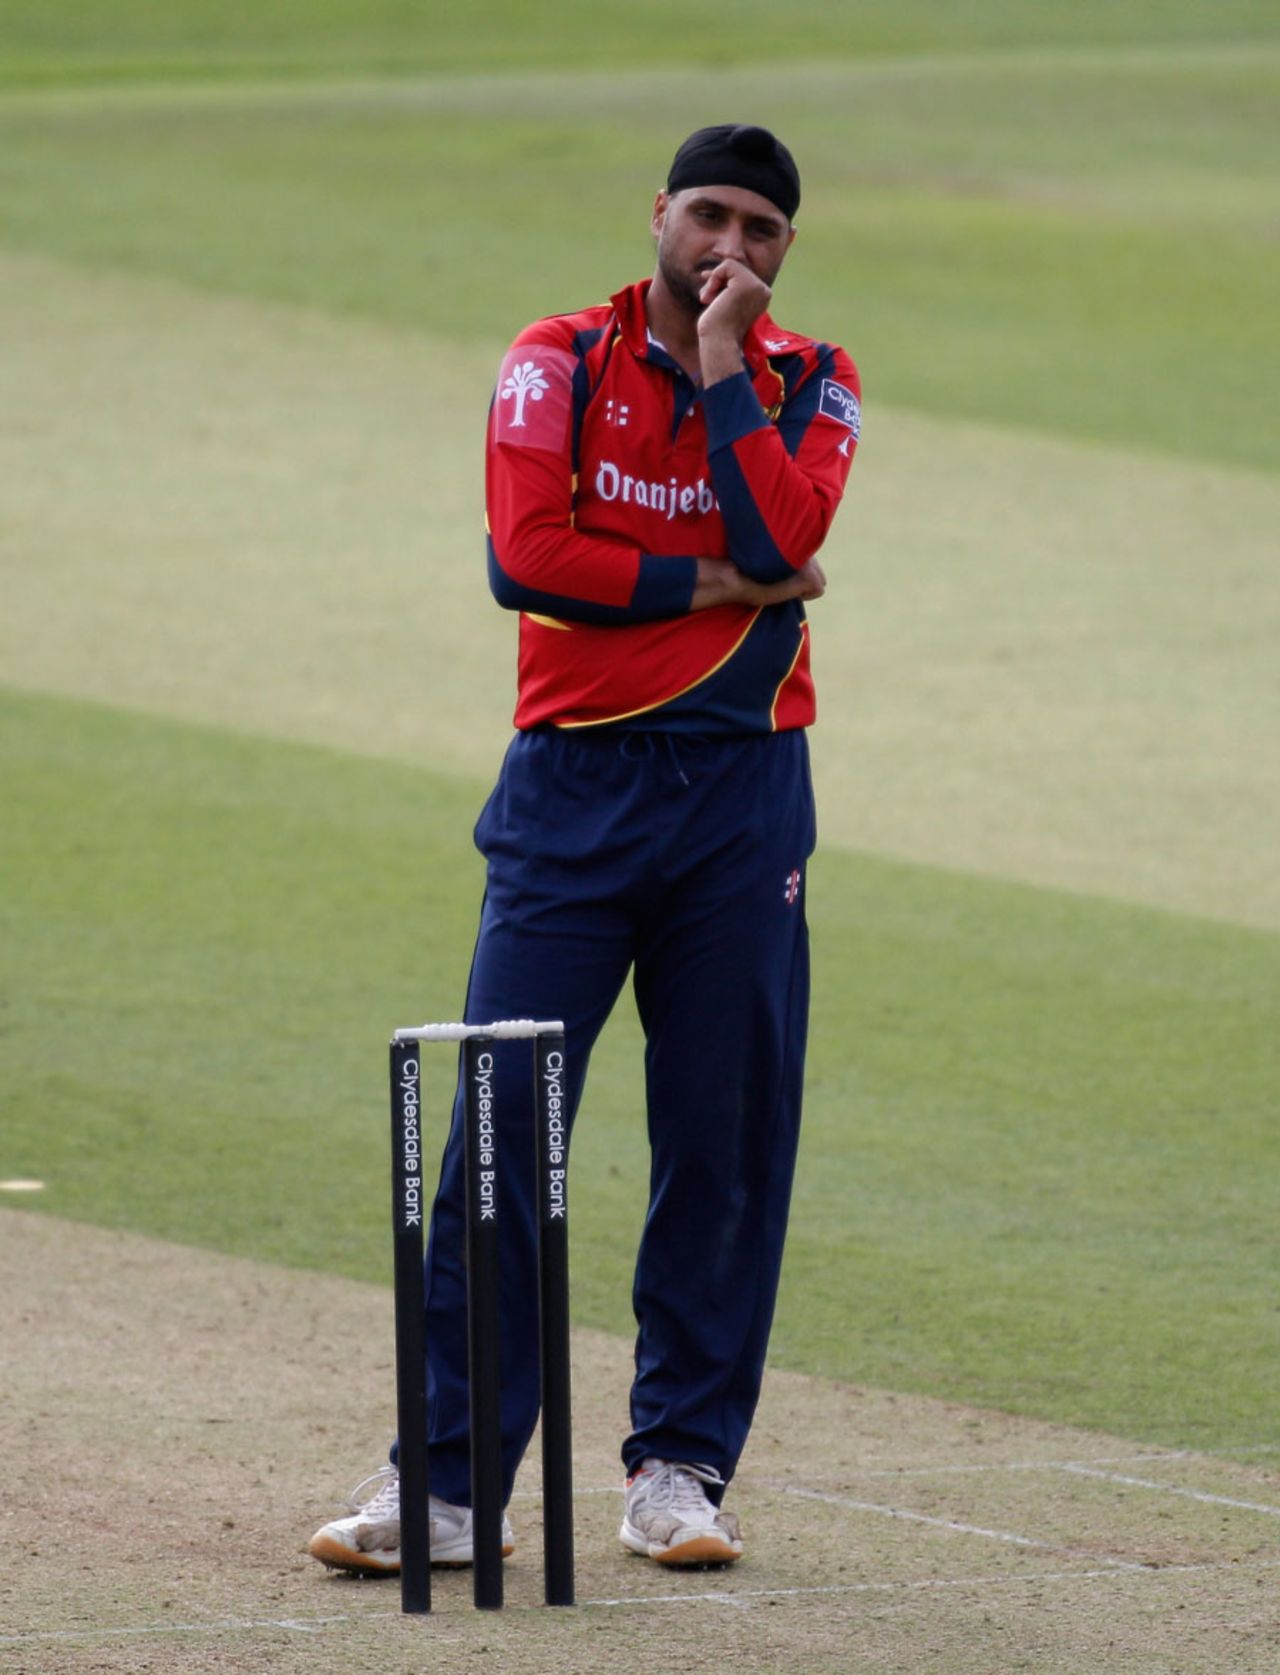 Harbhajan Singh's eight overs cost 63 runs, Middlesex v Essex, CB40 Group A, Lord's, August 27, 2012